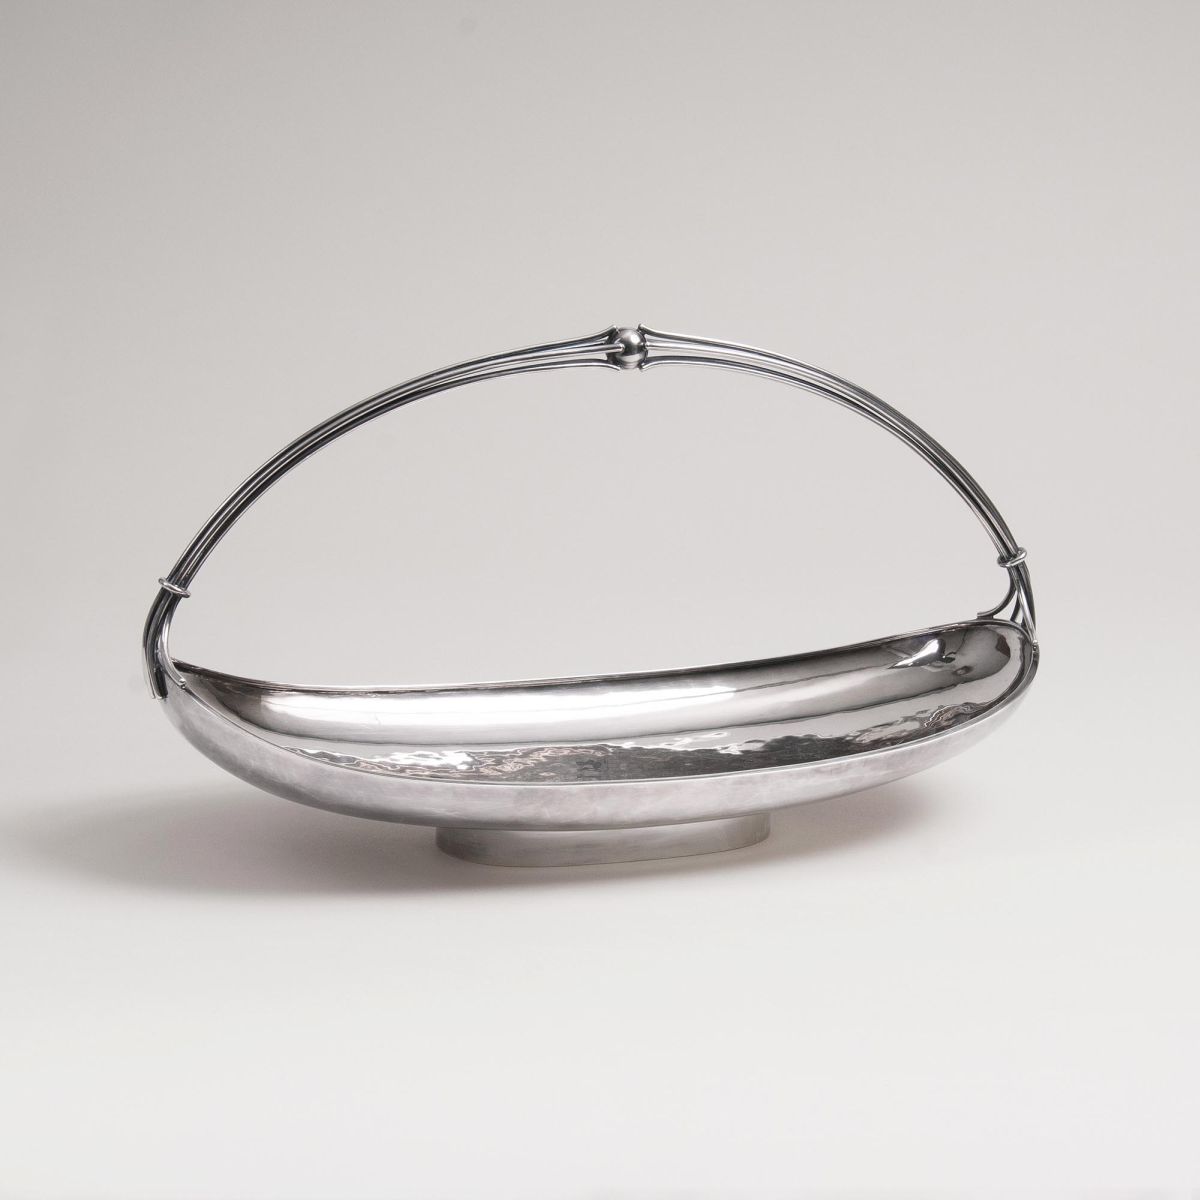 An Art-déco Bowl with Handle